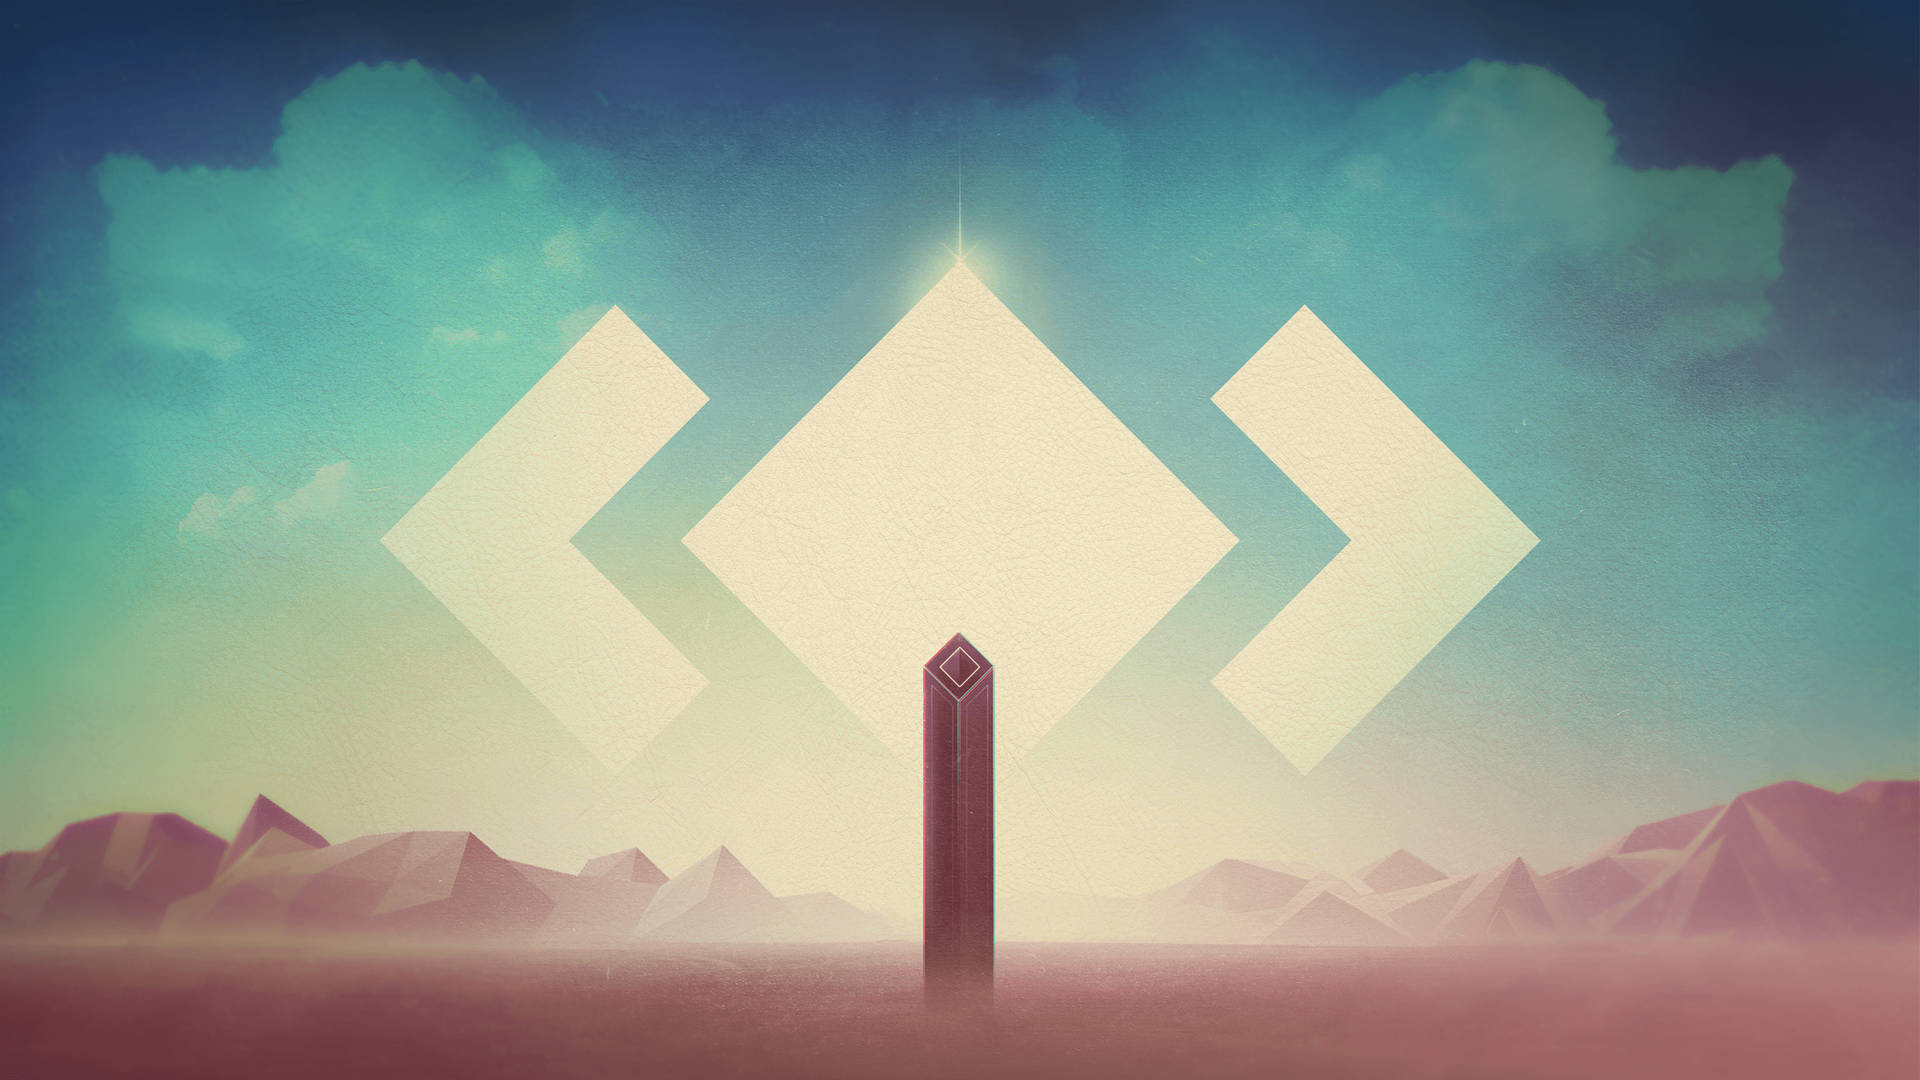 Adventure in Music with Madeon Wallpaper